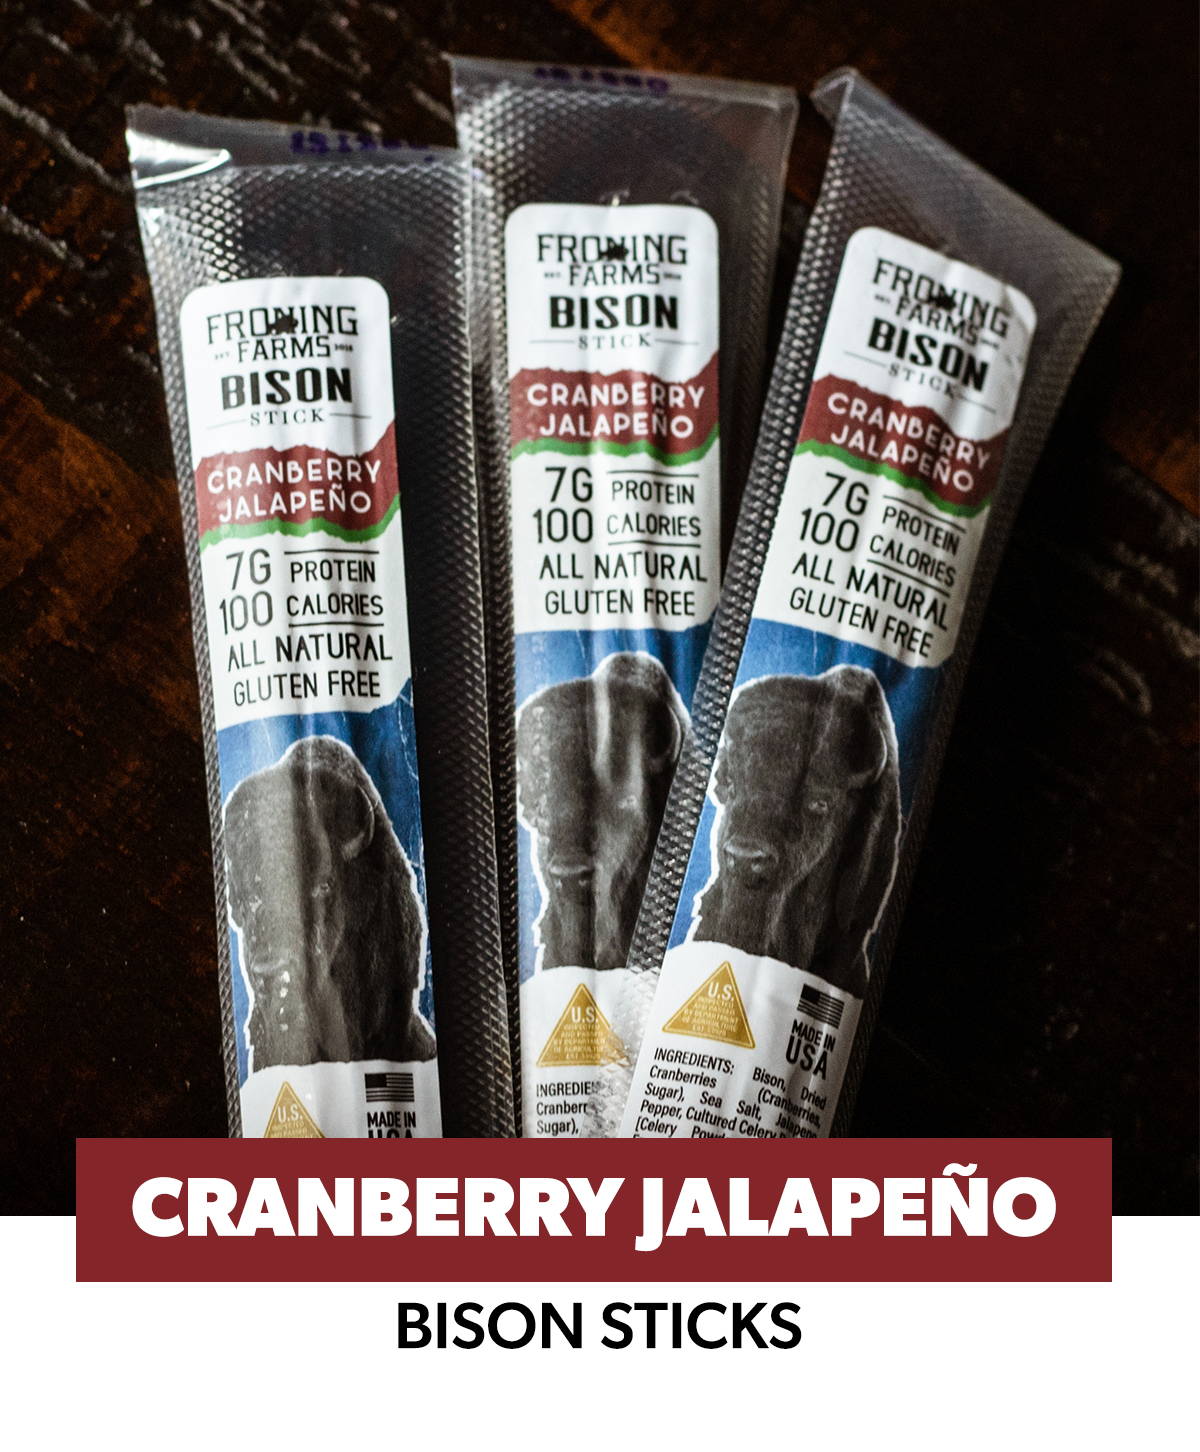 cranberry bison sticks froning farms